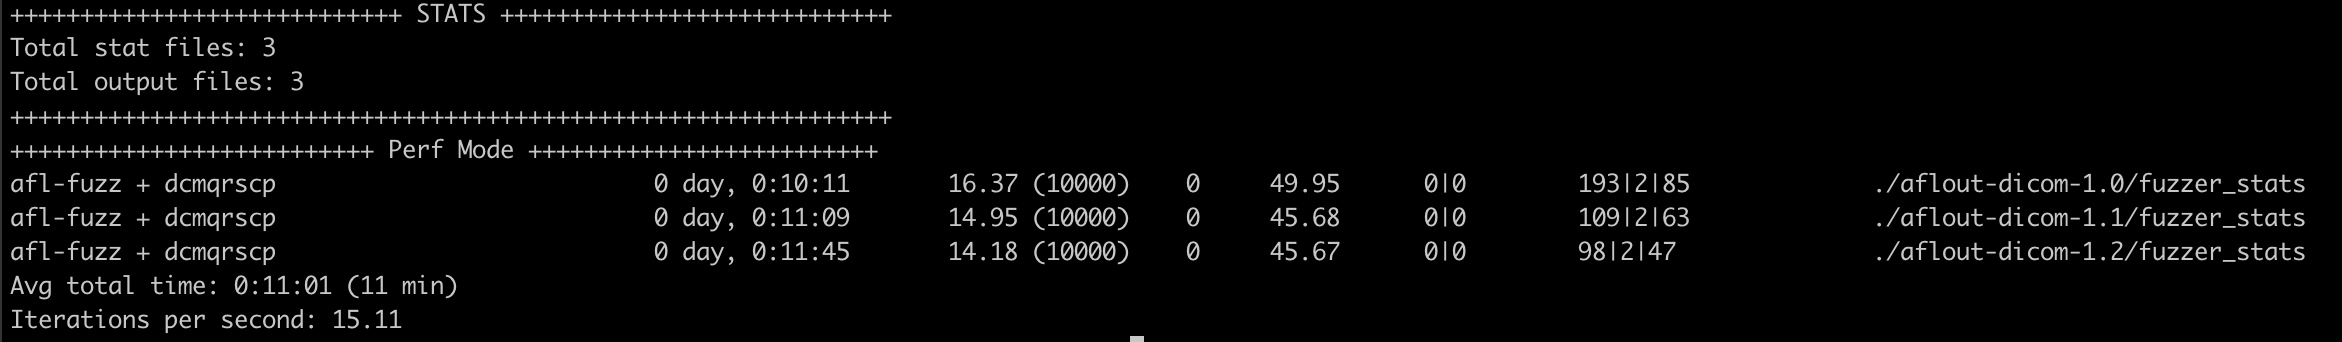 Example output of stats.py